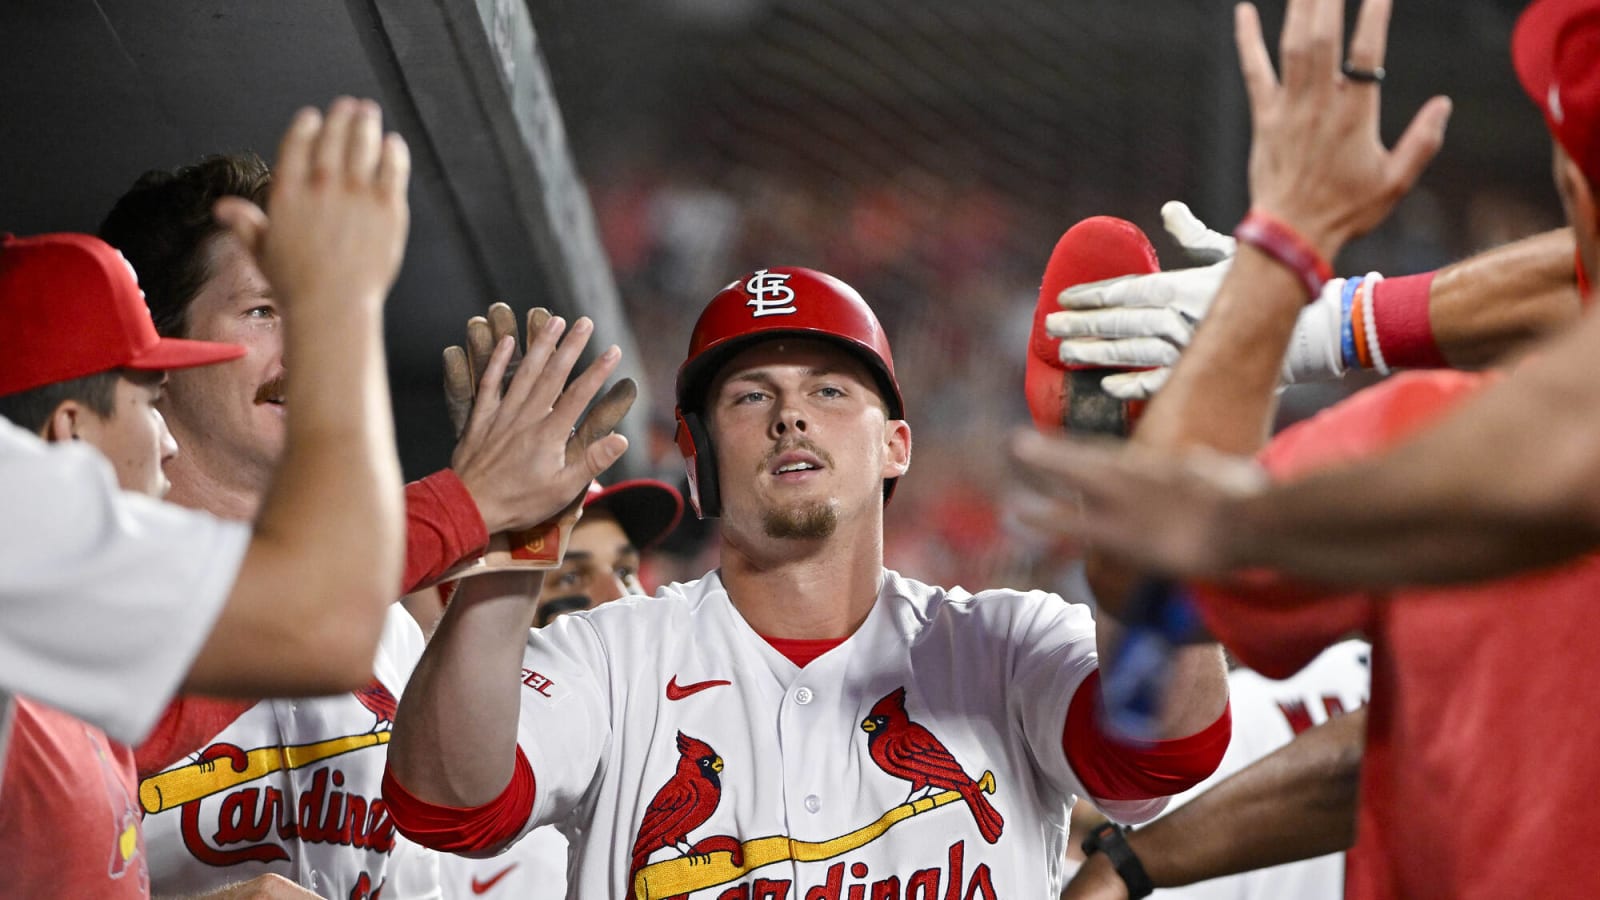 Gorman Powers Cardinals Past Marlins for Series Sweep